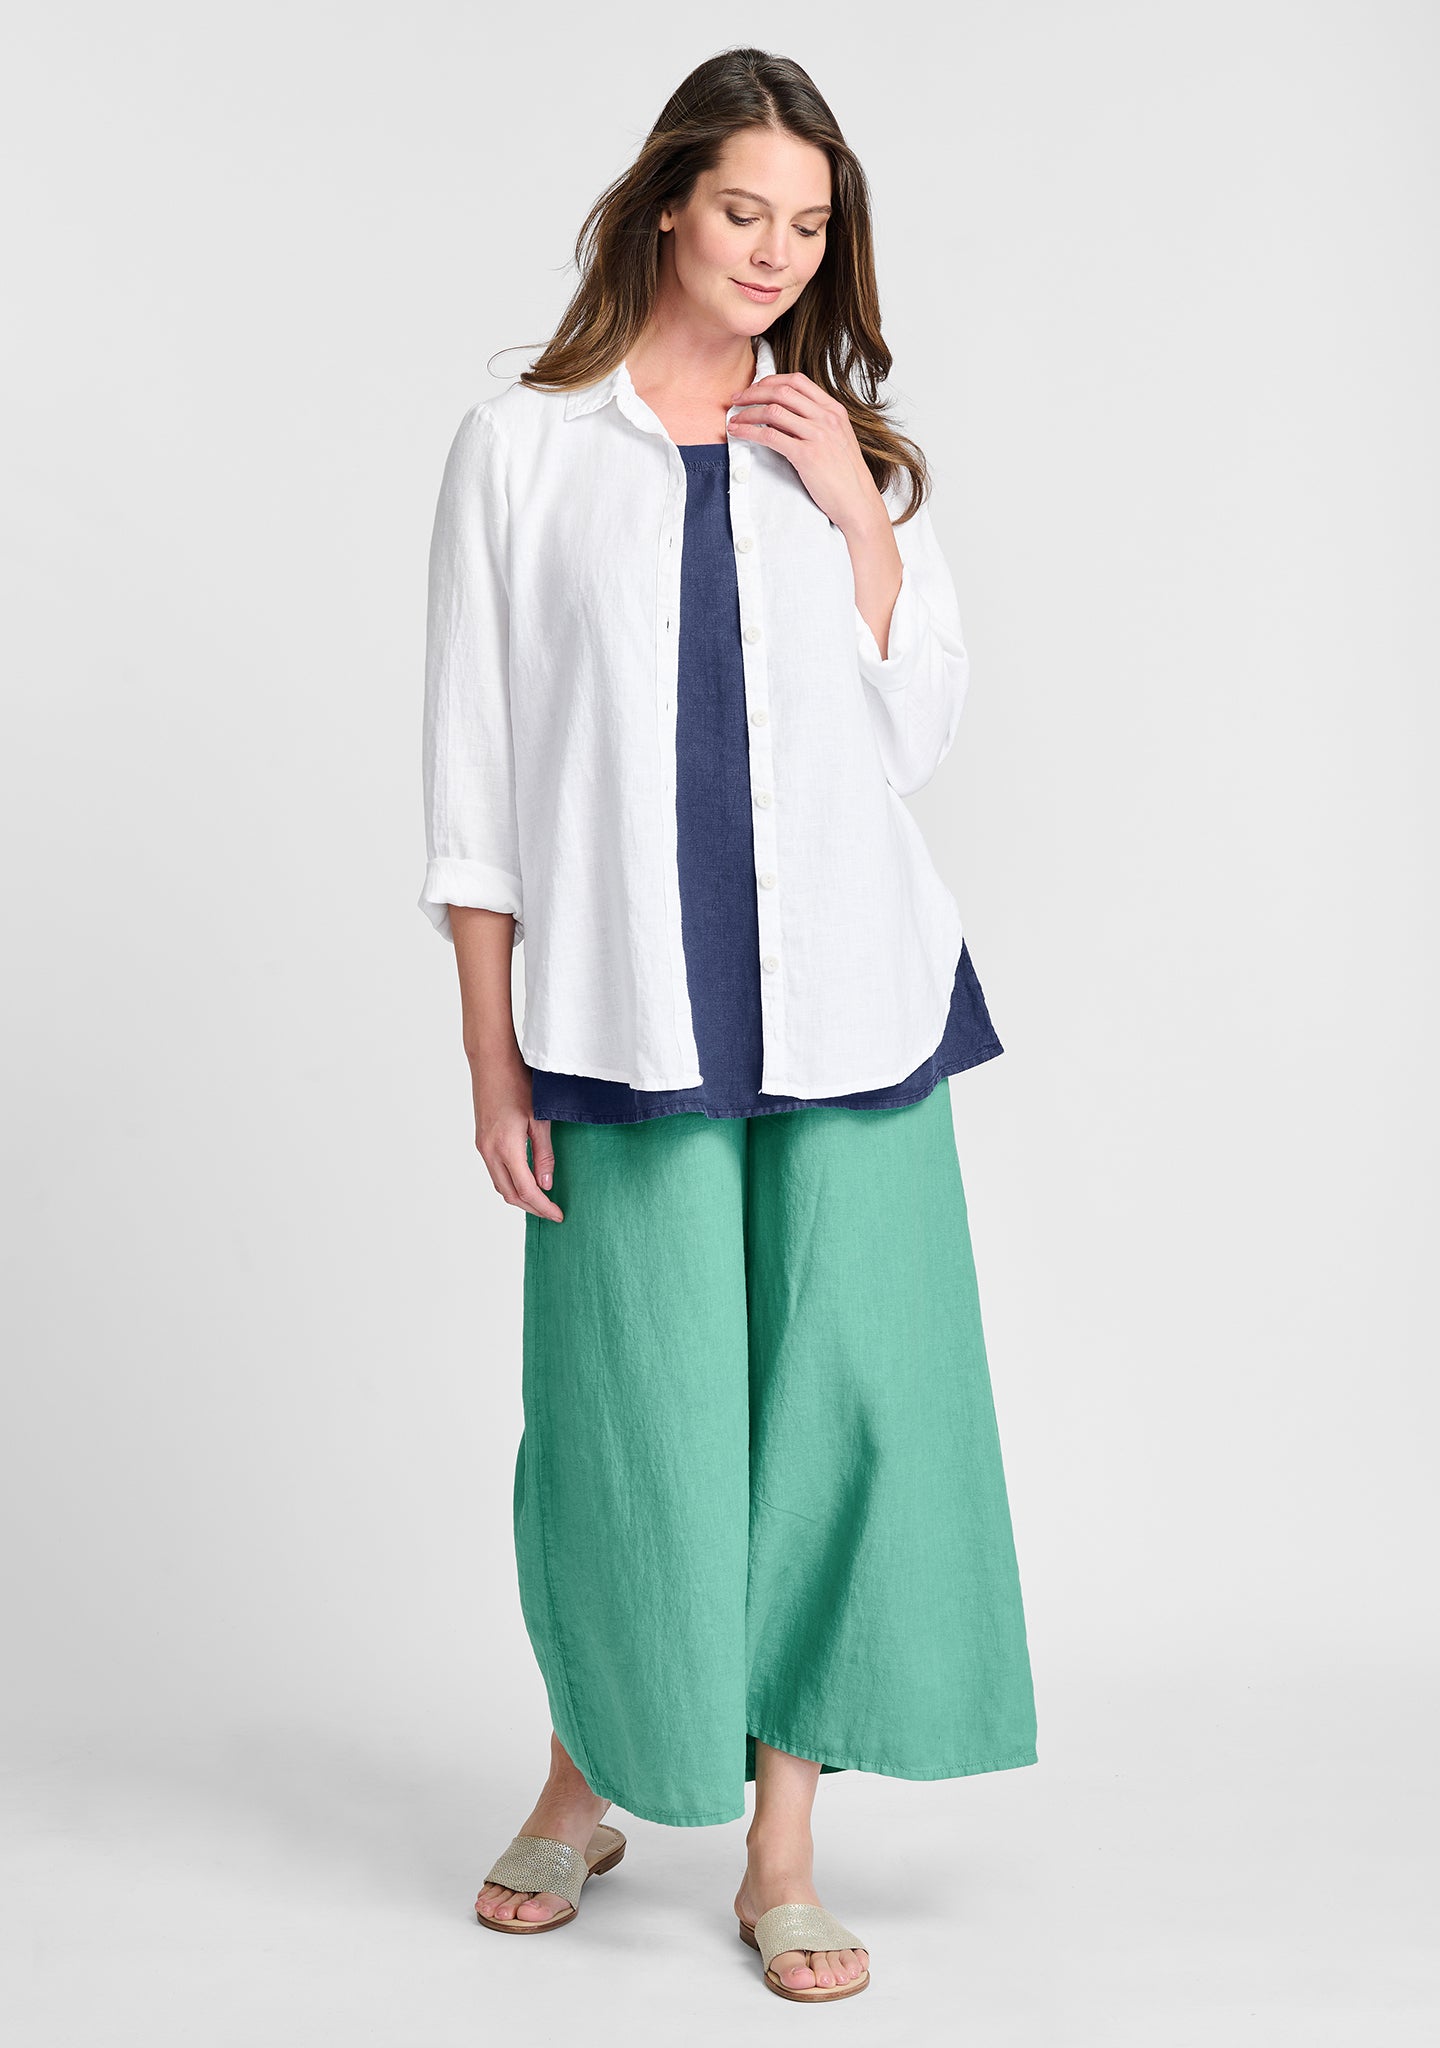 FLAX linen shirt in white with linen tank in blue and linen pants in green